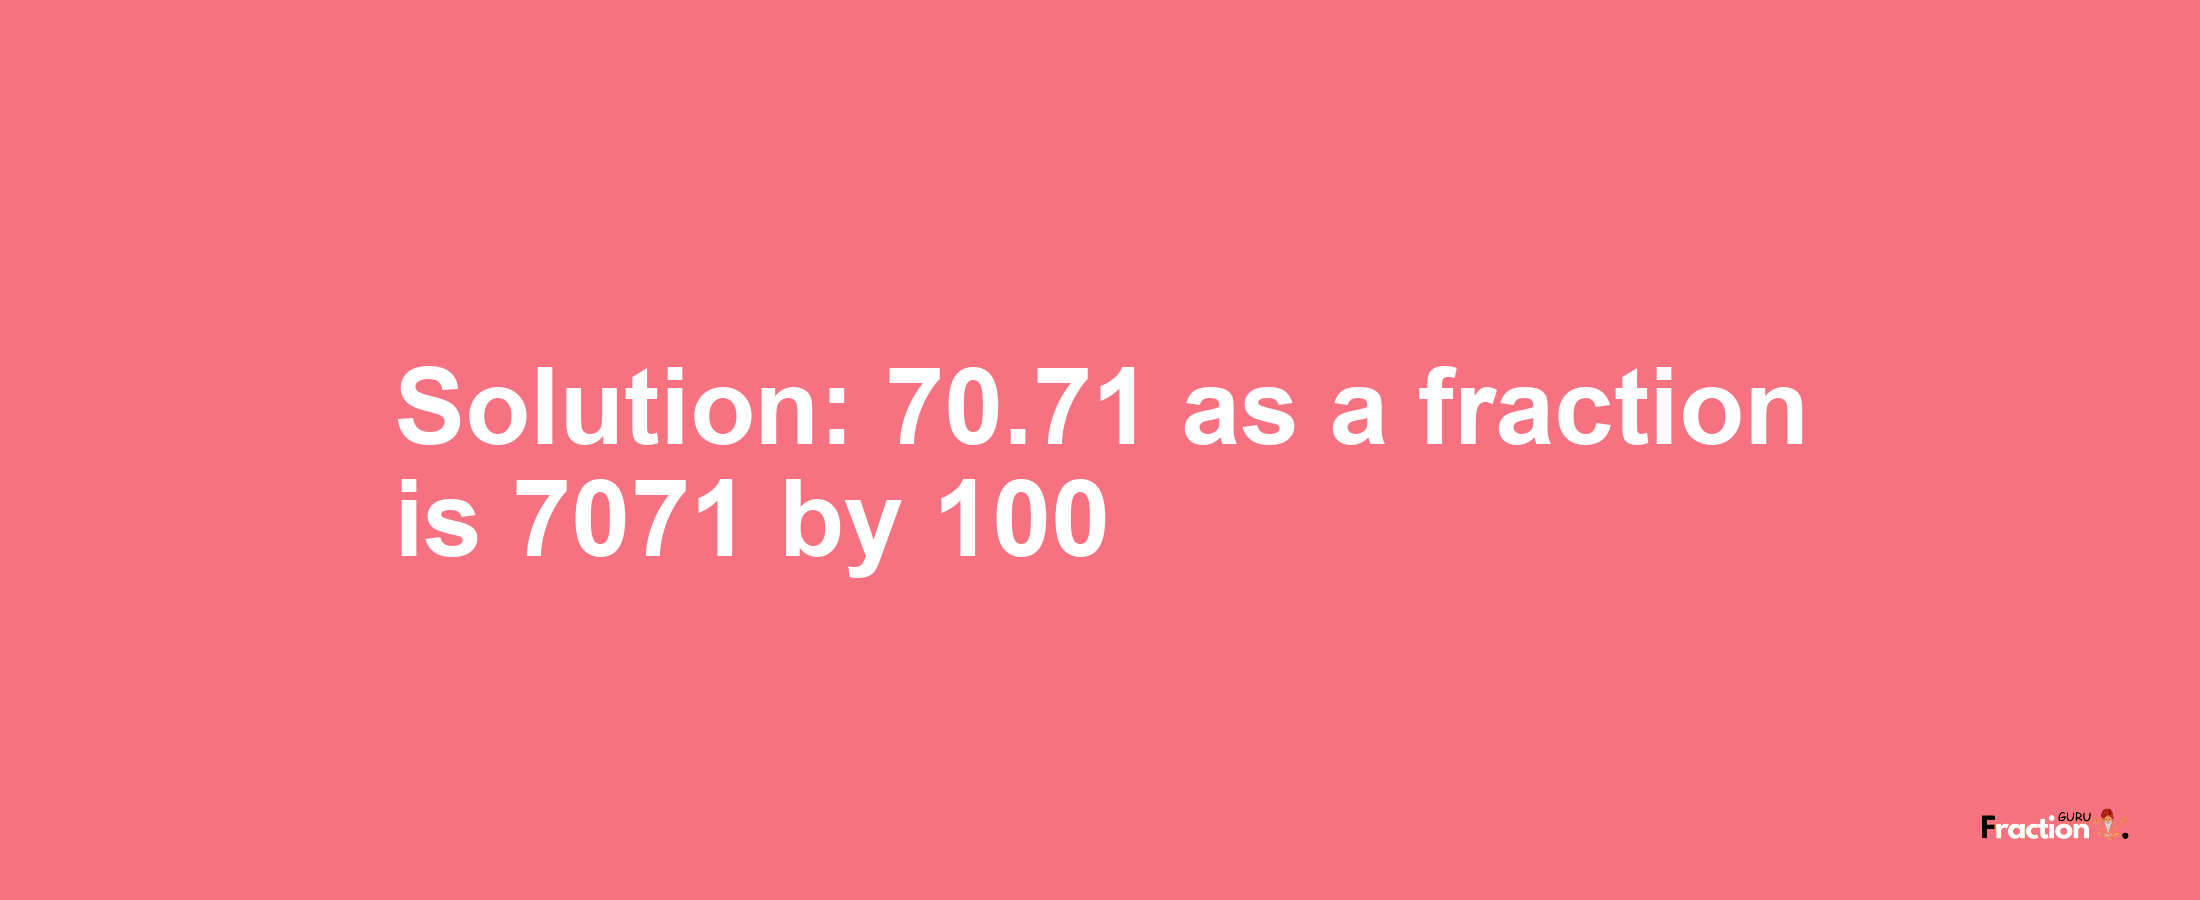 Solution:70.71 as a fraction is 7071/100